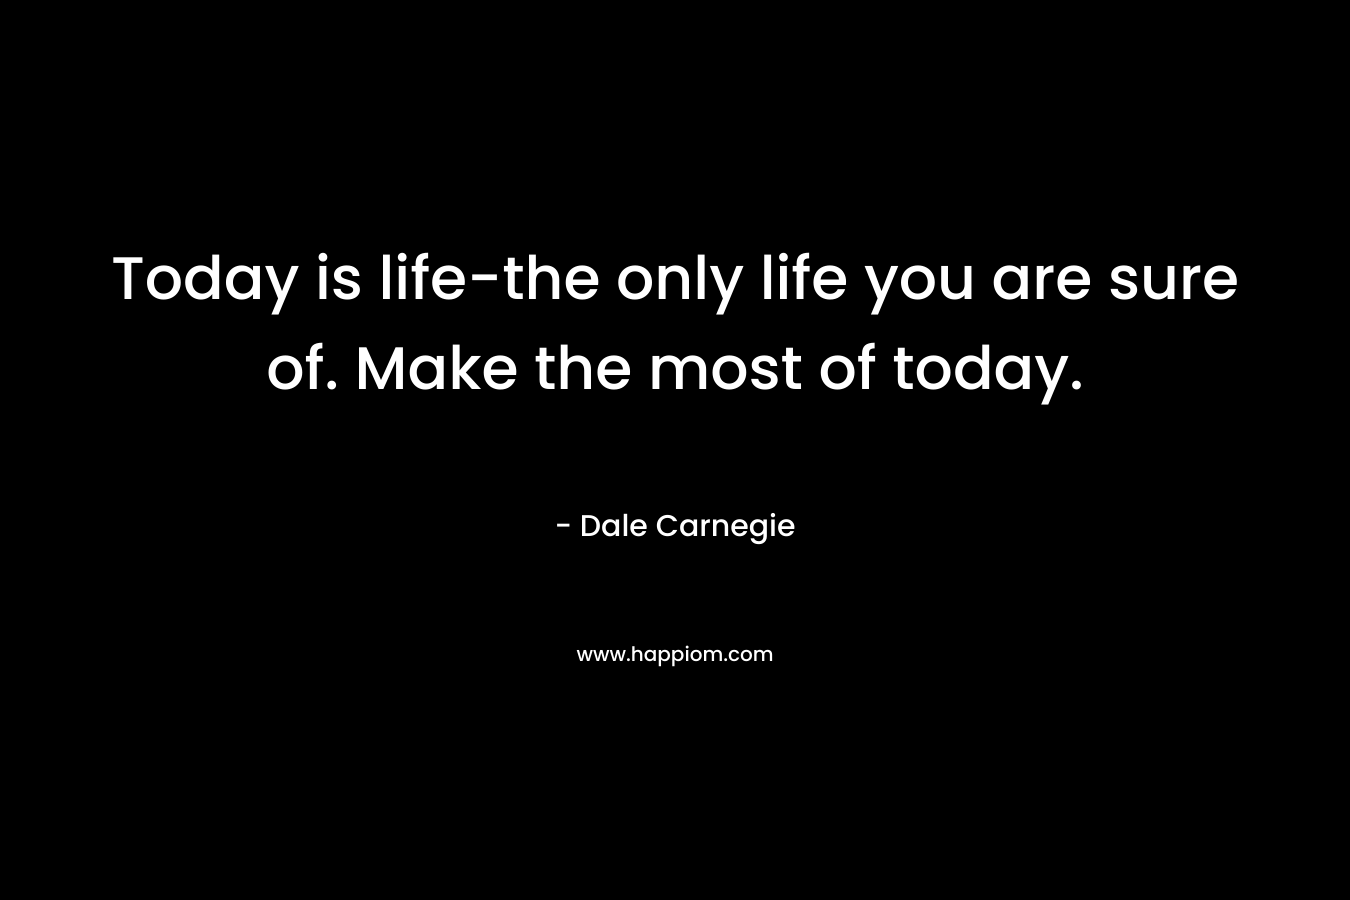 Today is life-the only life you are sure of. Make the most of today. – Dale Carnegie